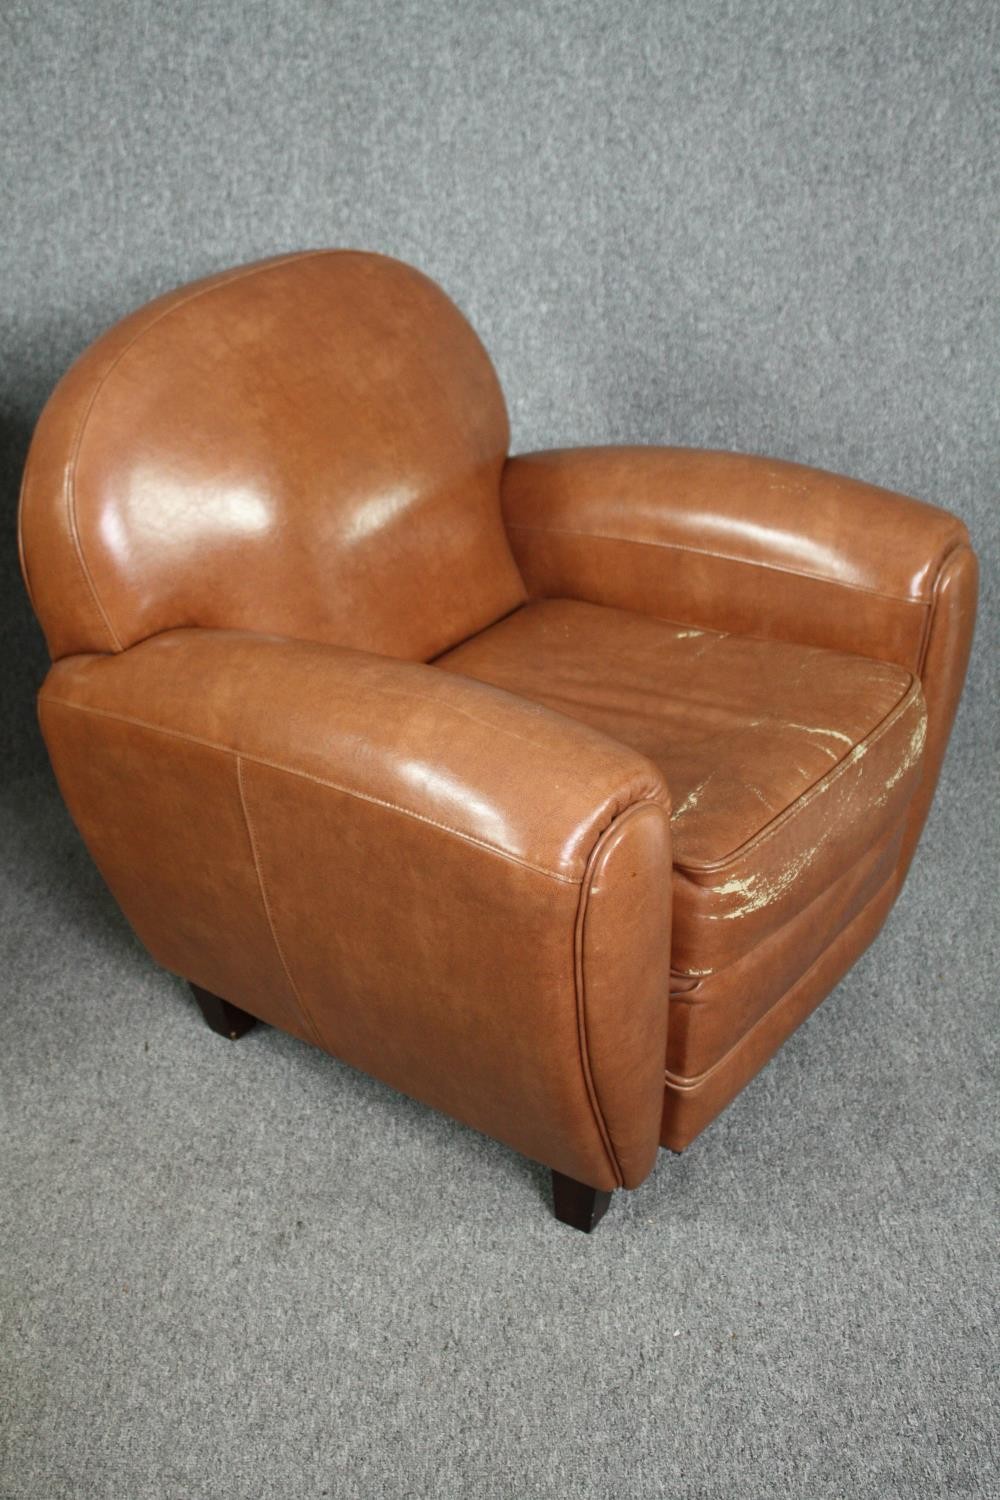 Armchairs, Art Deco style upholstered in faux leather. H.85 W.86 D.78cm. (Each) (Worn as seen). - Image 3 of 7